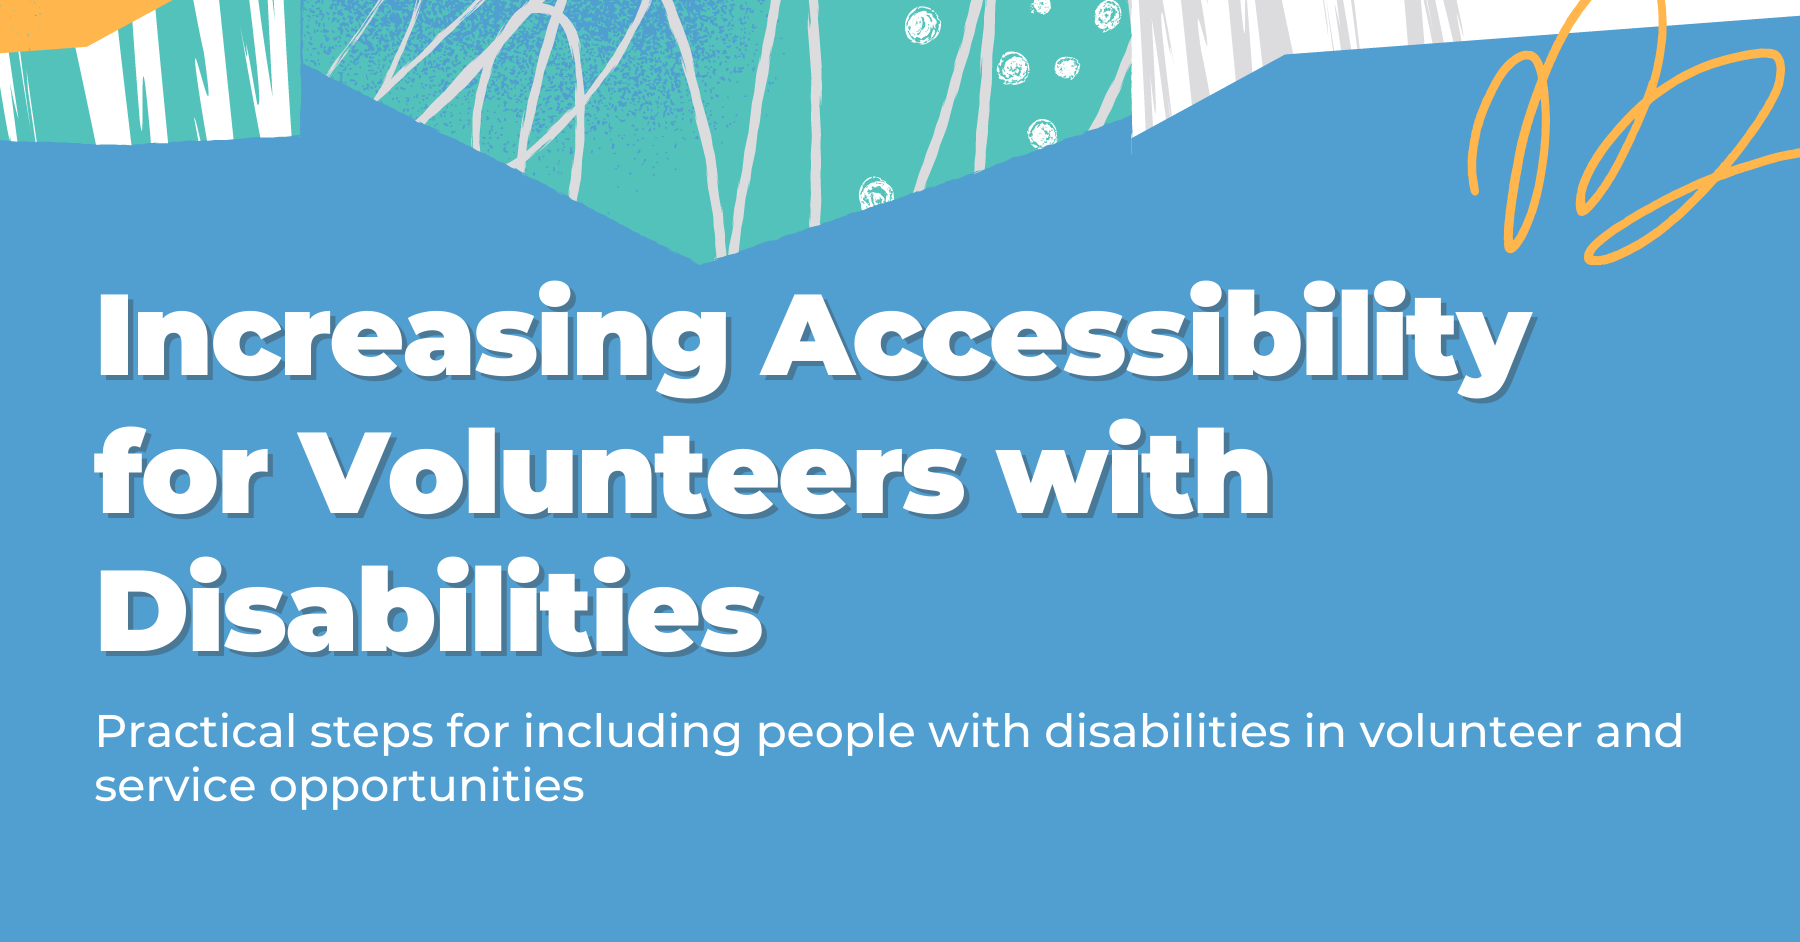 Increasing Accessibility for Volunteers with Disabilities